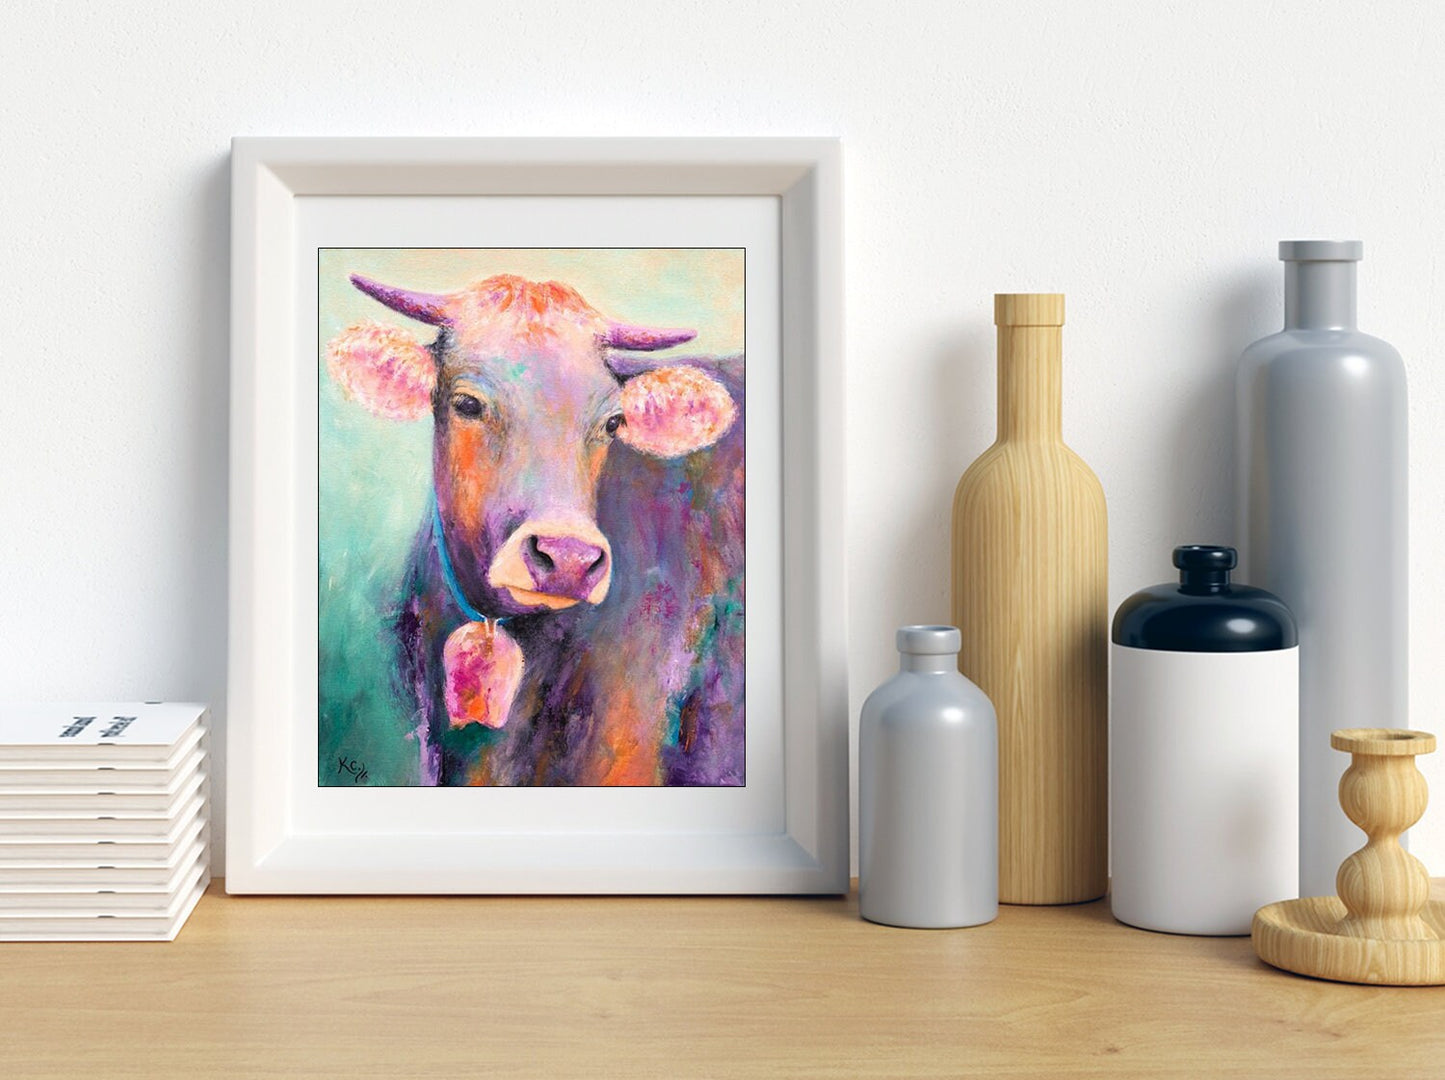 Cow Art Print on Paper or Canvas - Purple Cow Gifts for Her, Cow Wall Artwork, Cow Decor. Print of Cow Painting by Krystle Cole